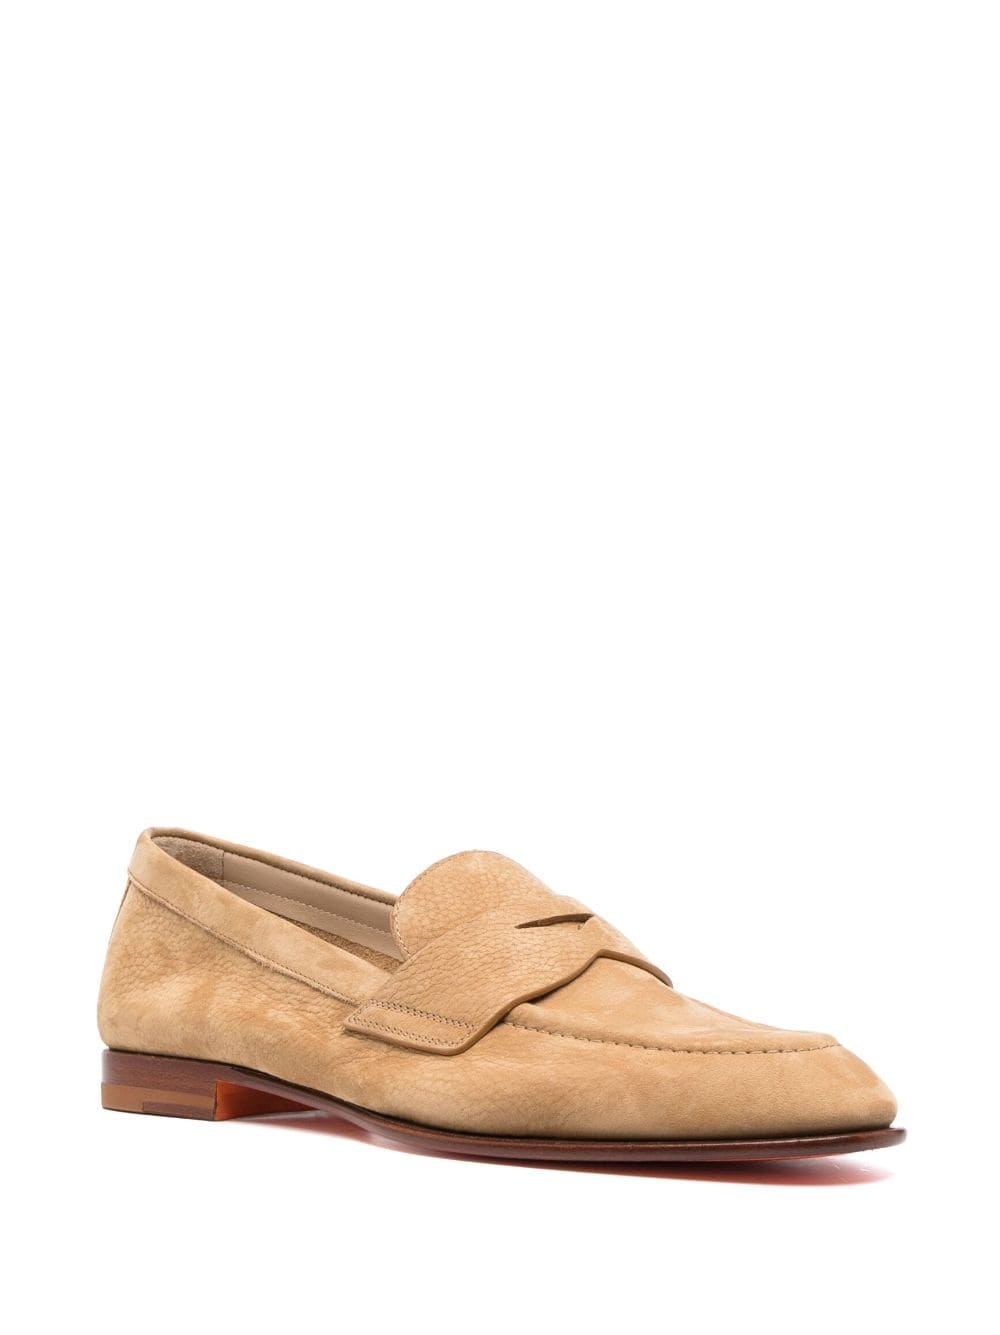 suede penny loafers - 2